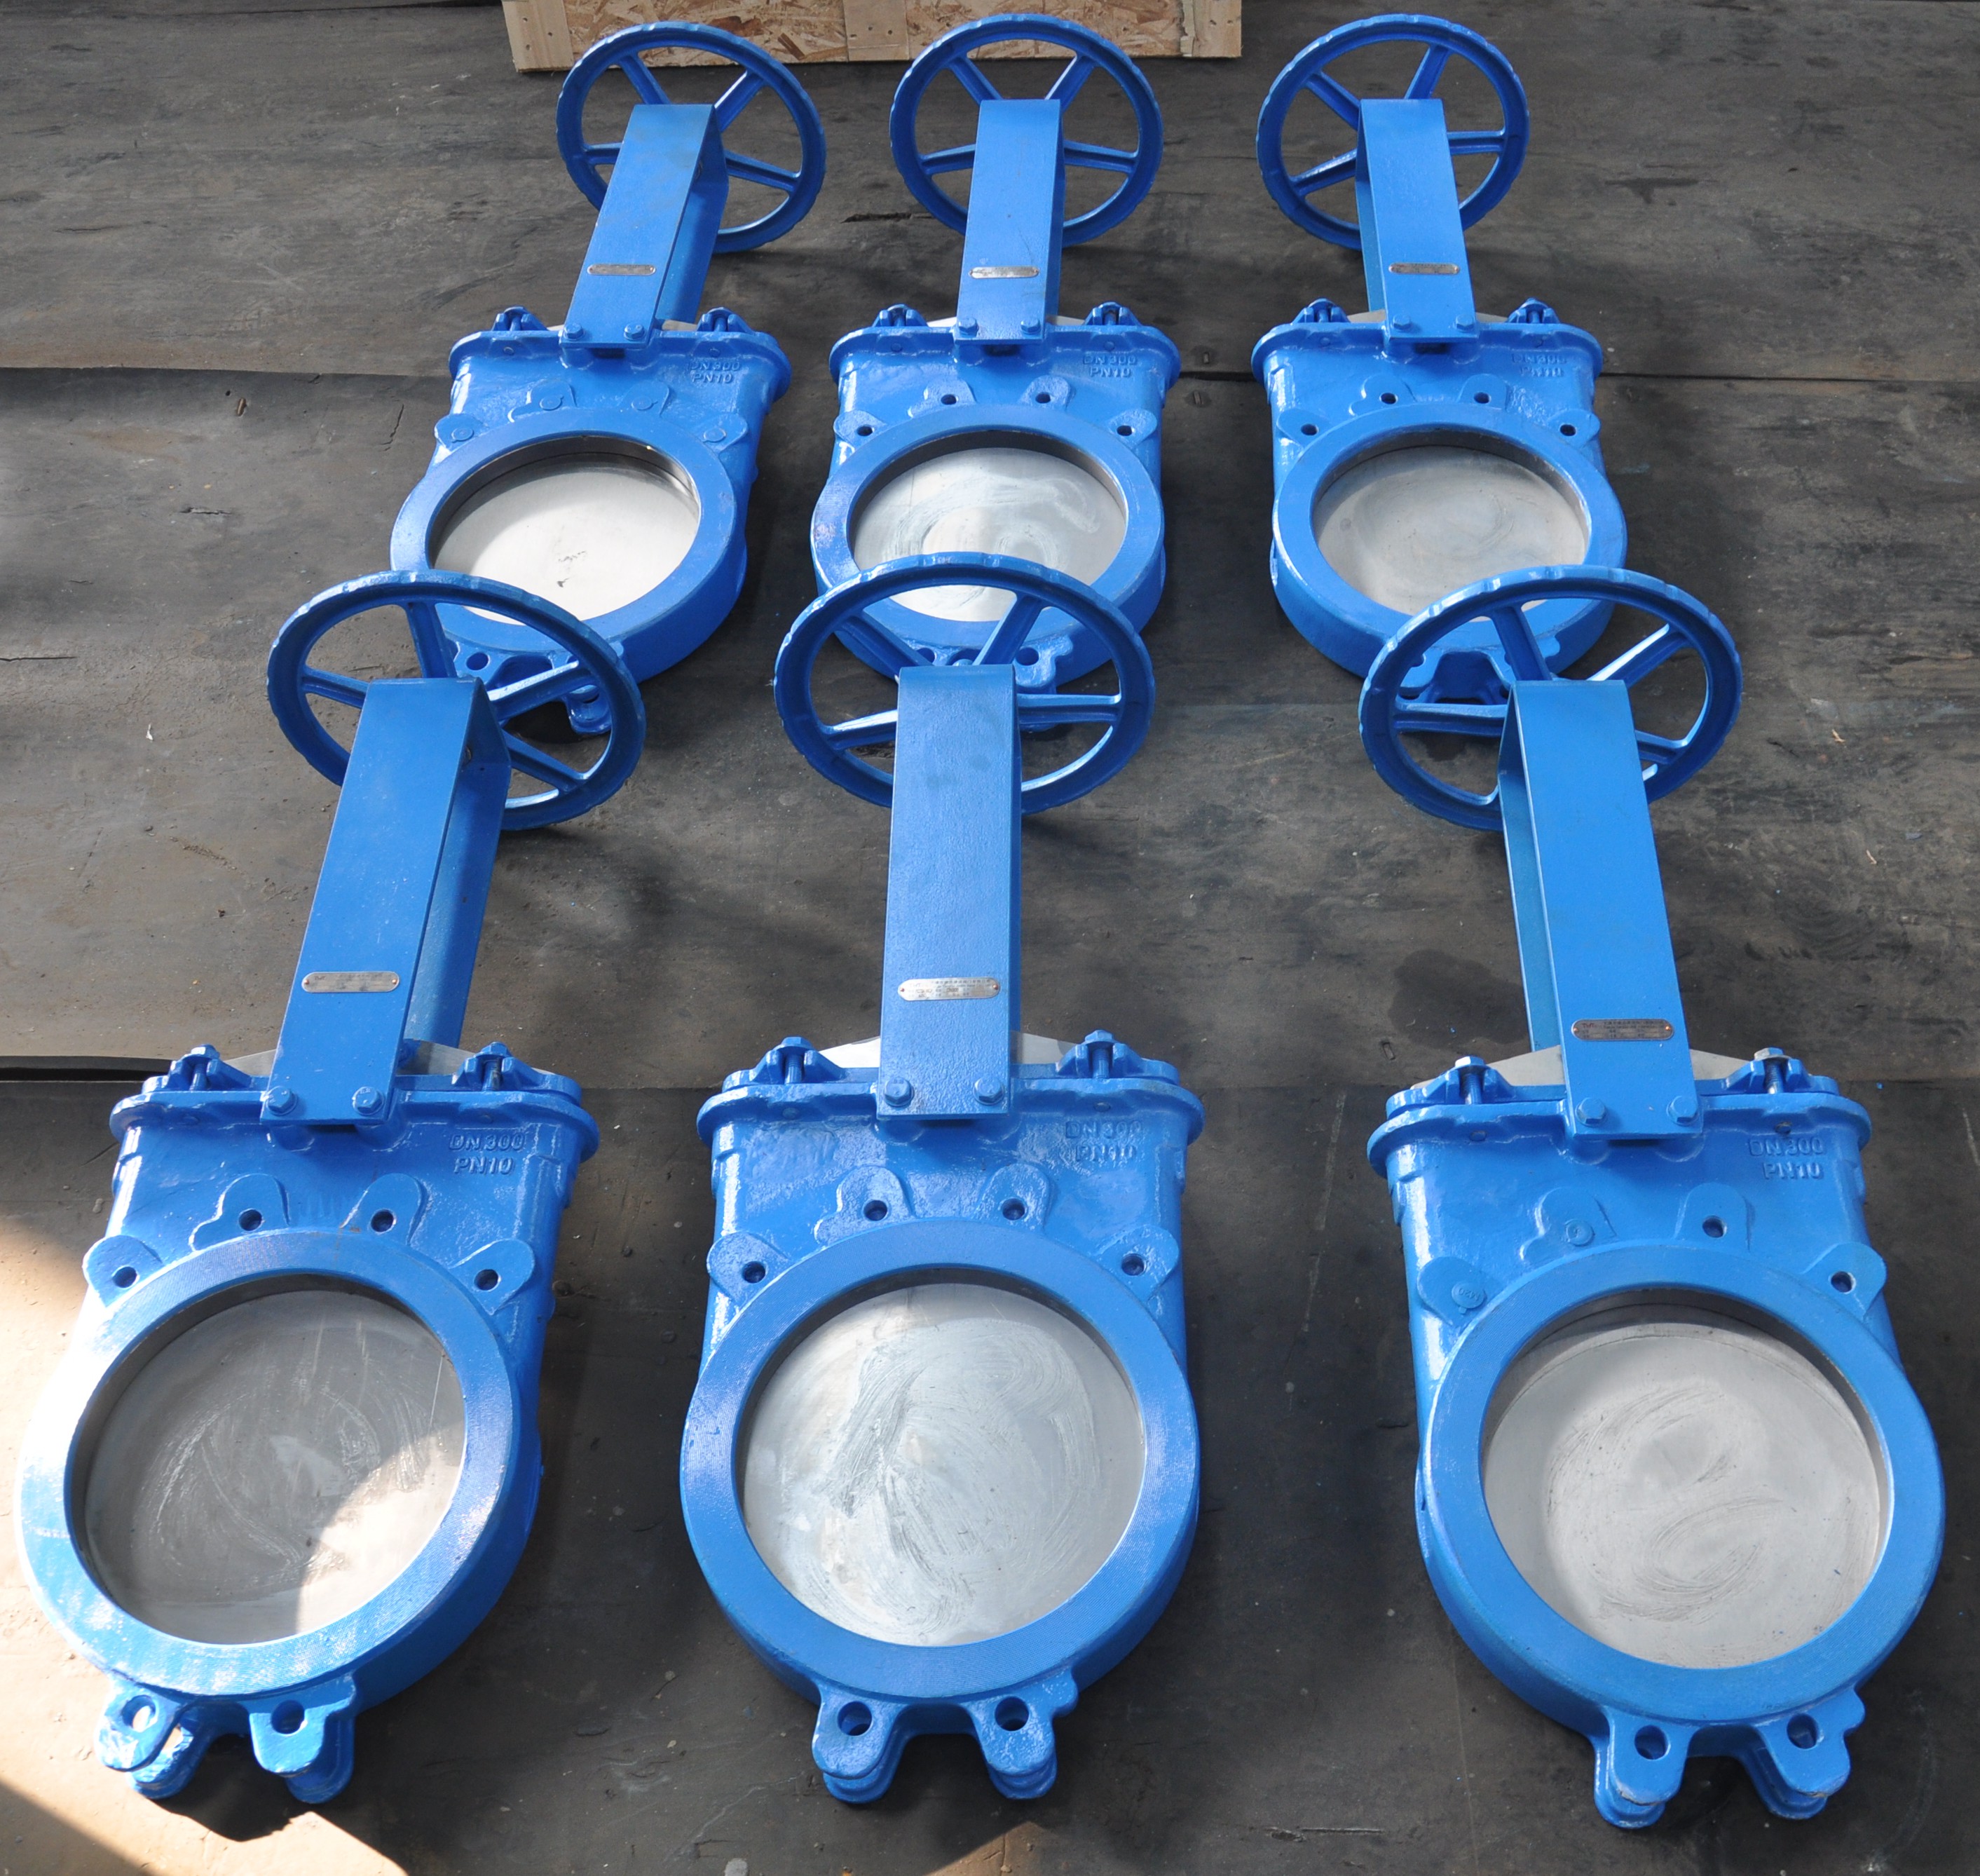 The difference between knife gate valve and gate valve